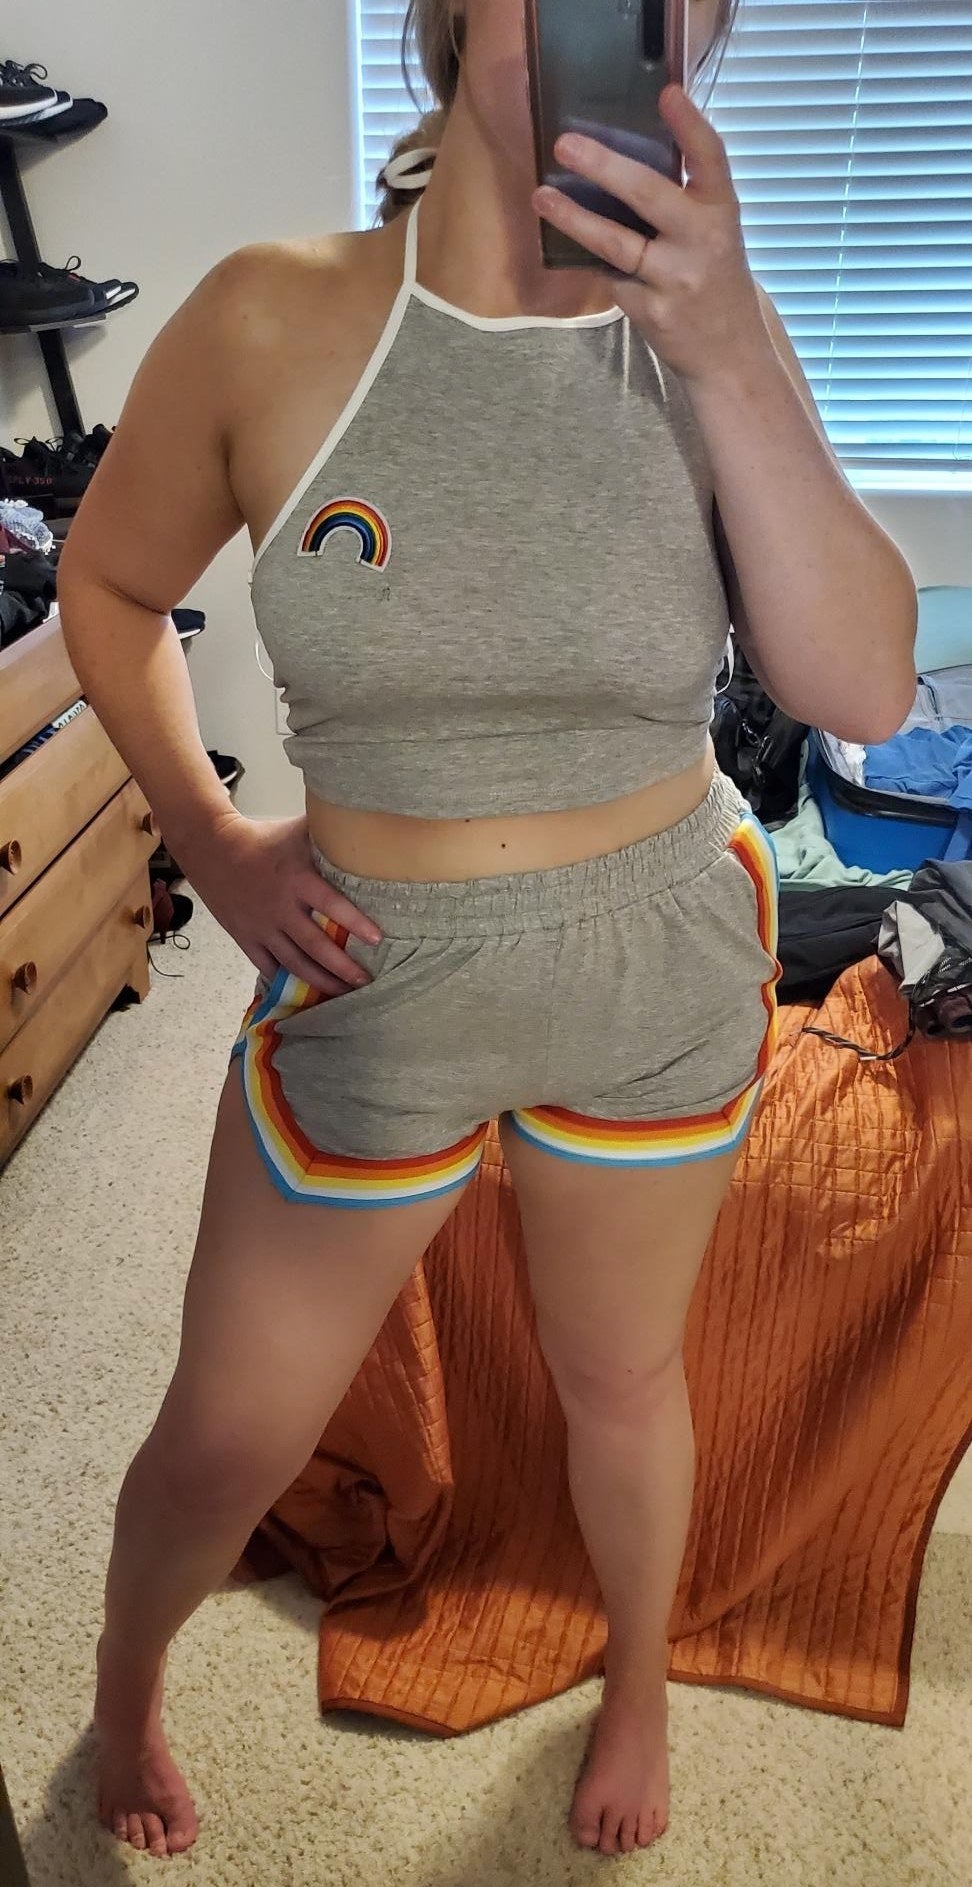 The set in gray worn by an Amazon reviewer taking a bedroom selfie